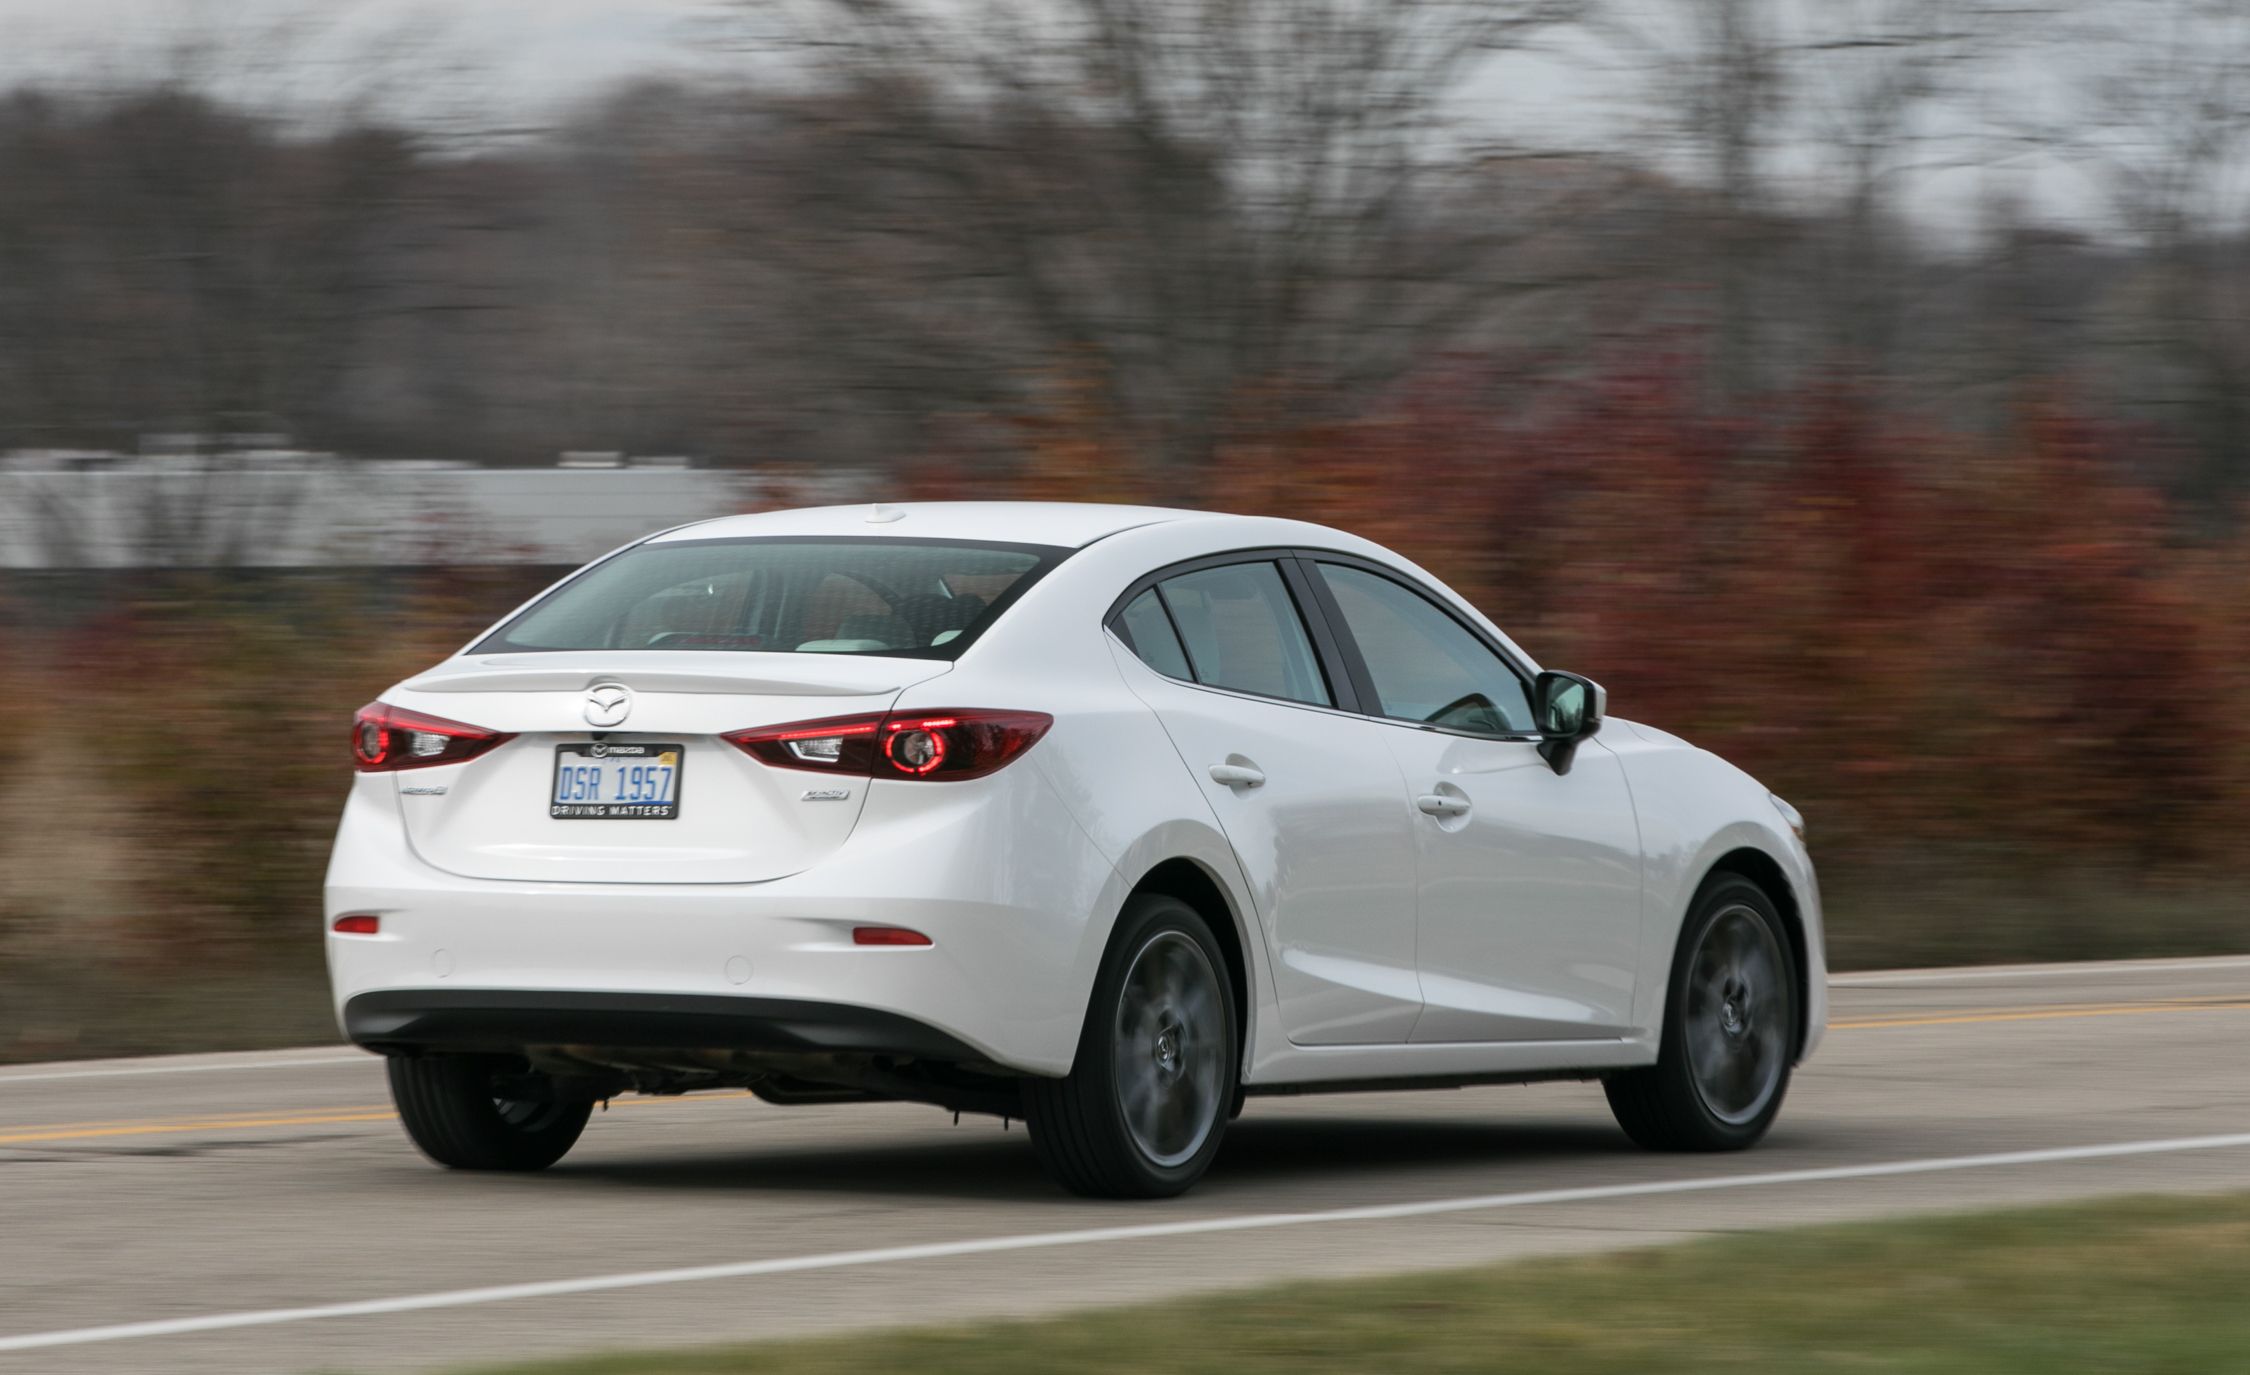 2018 Mazda3 5-Door Grand Touring Review: The Noble Steed of